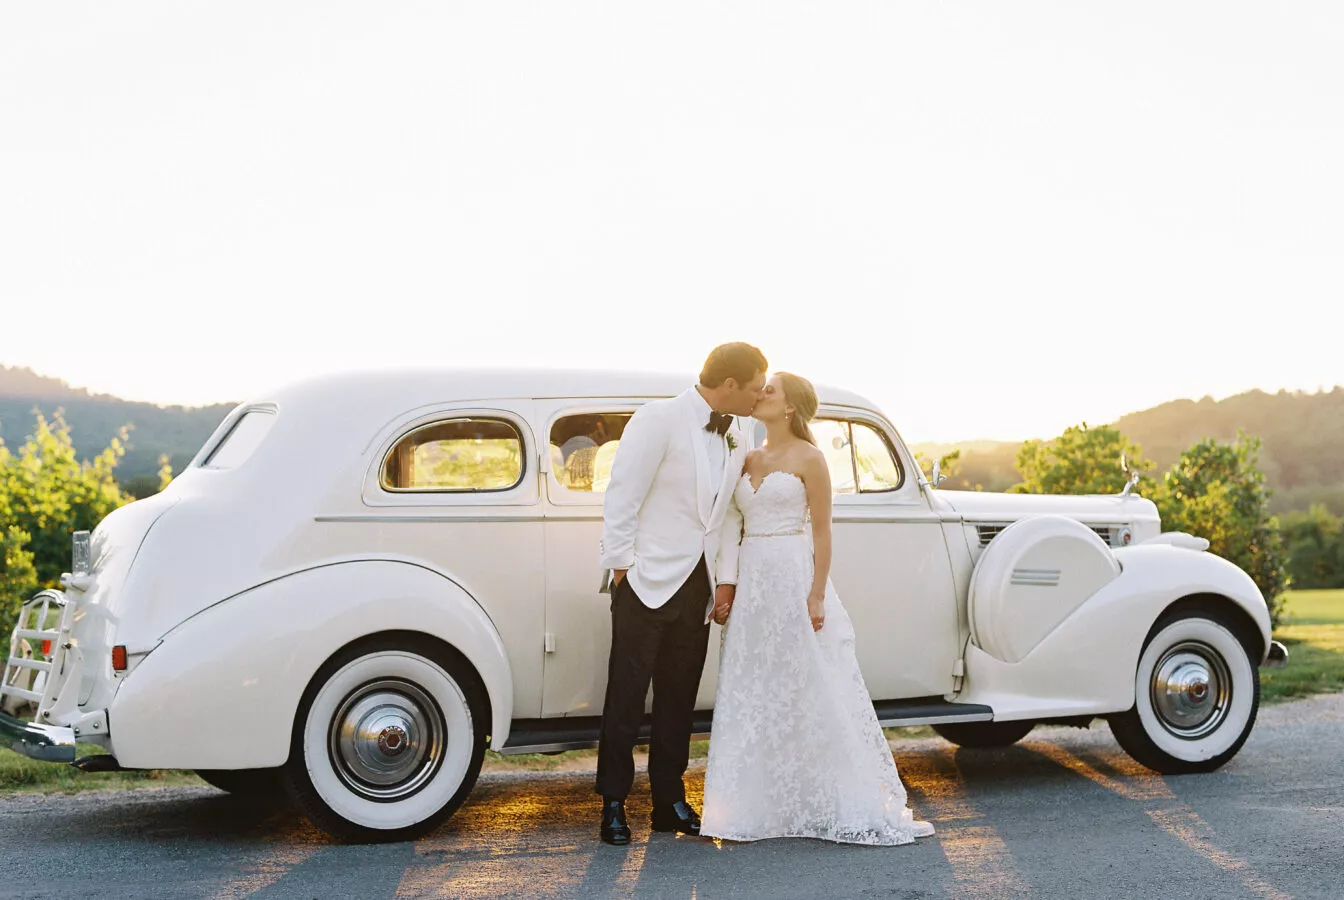 A bride and groom kiss in front of a classic white wedding car